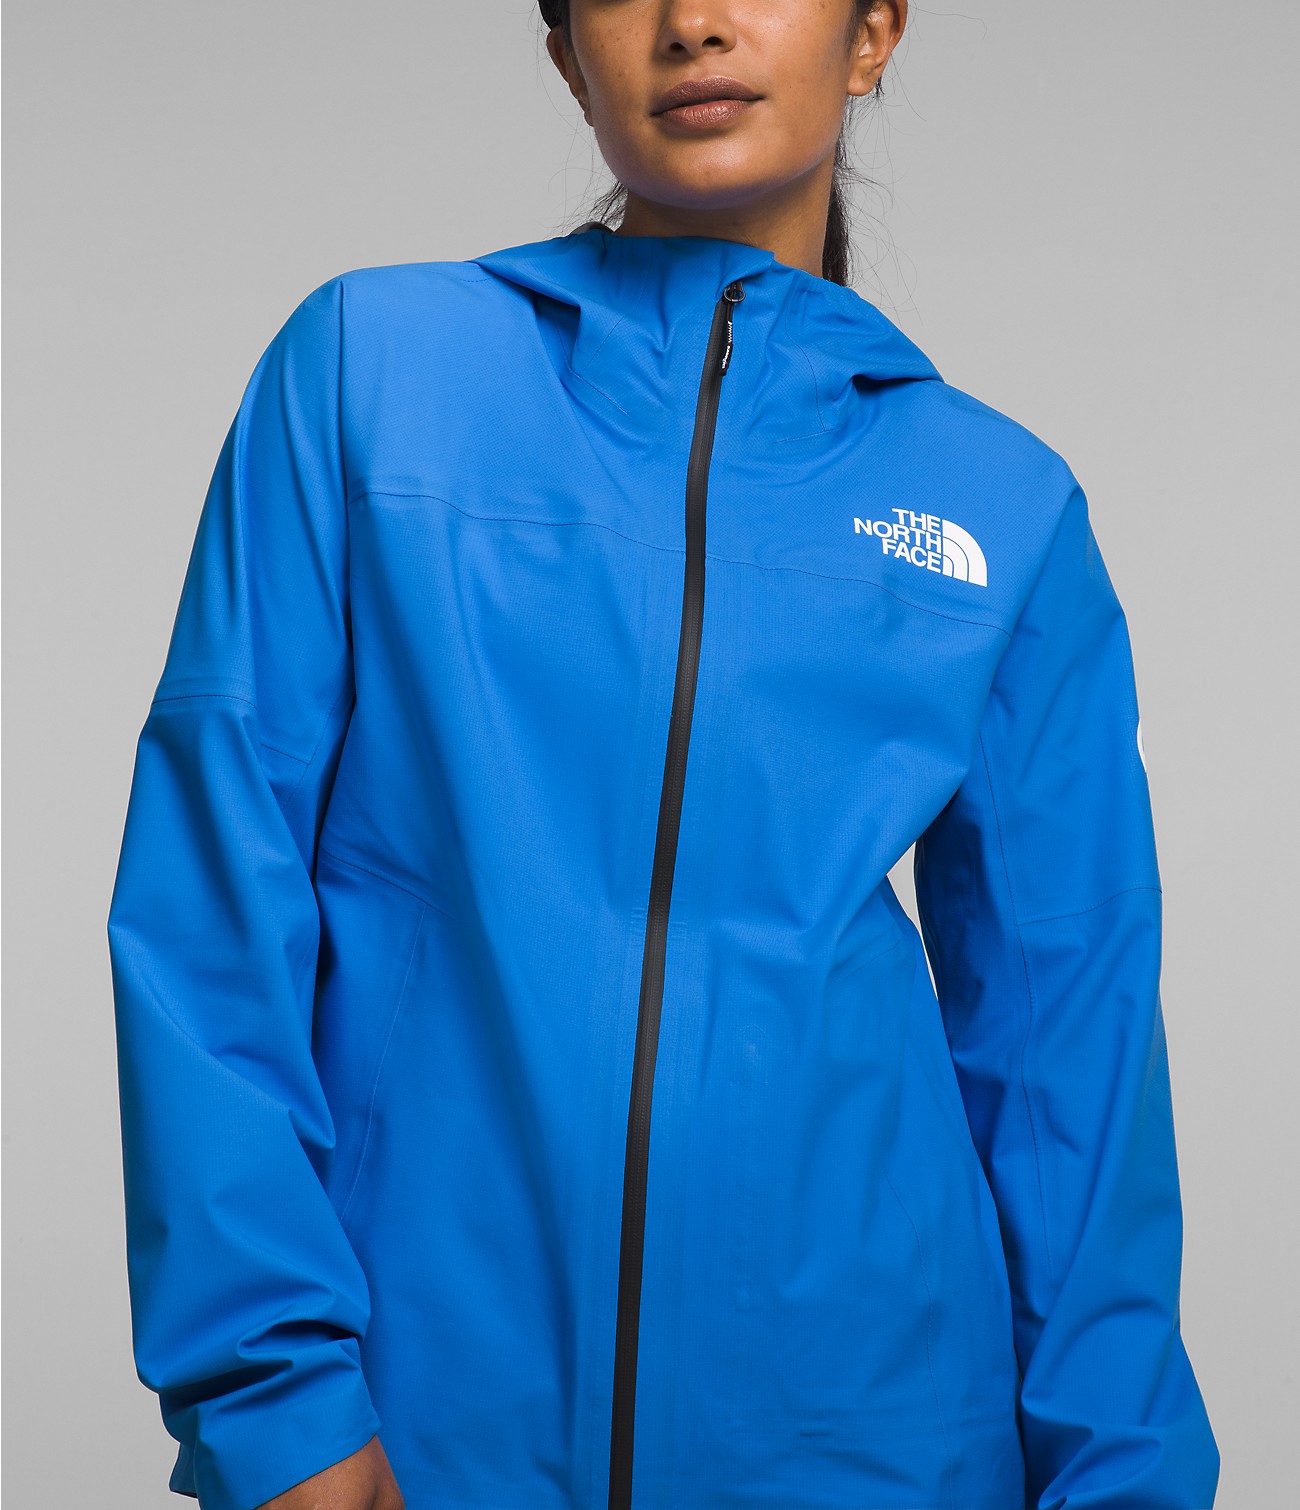 Unlock Wilderness' choice in the Montbell Vs North Face comparison, the Summit Series Superior FUTURELIGHT™ Jacket by The North Face